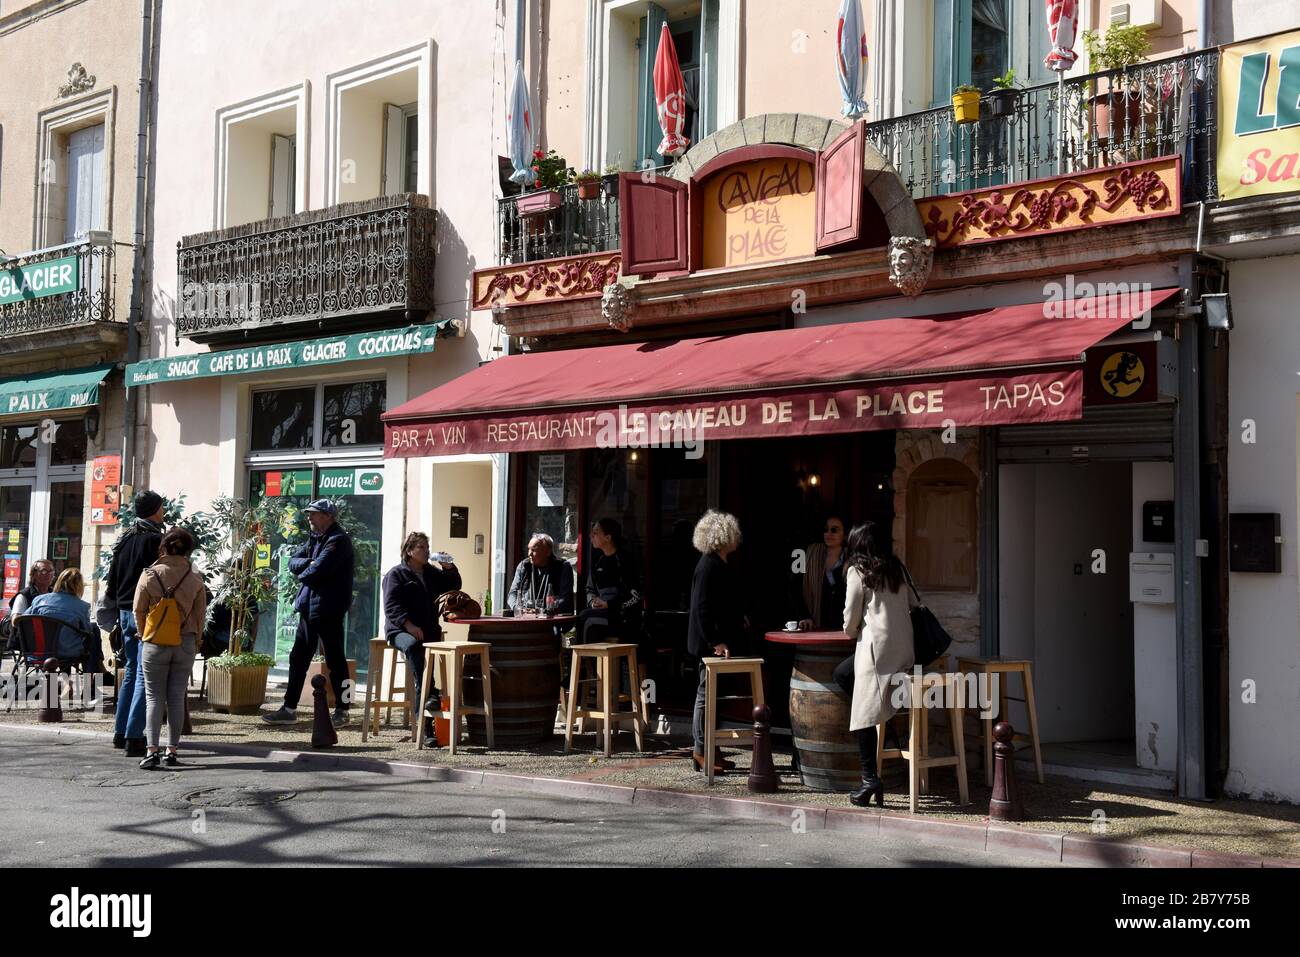 Capestang in the Hérault department in southern France. French cafe bar Stock Photo